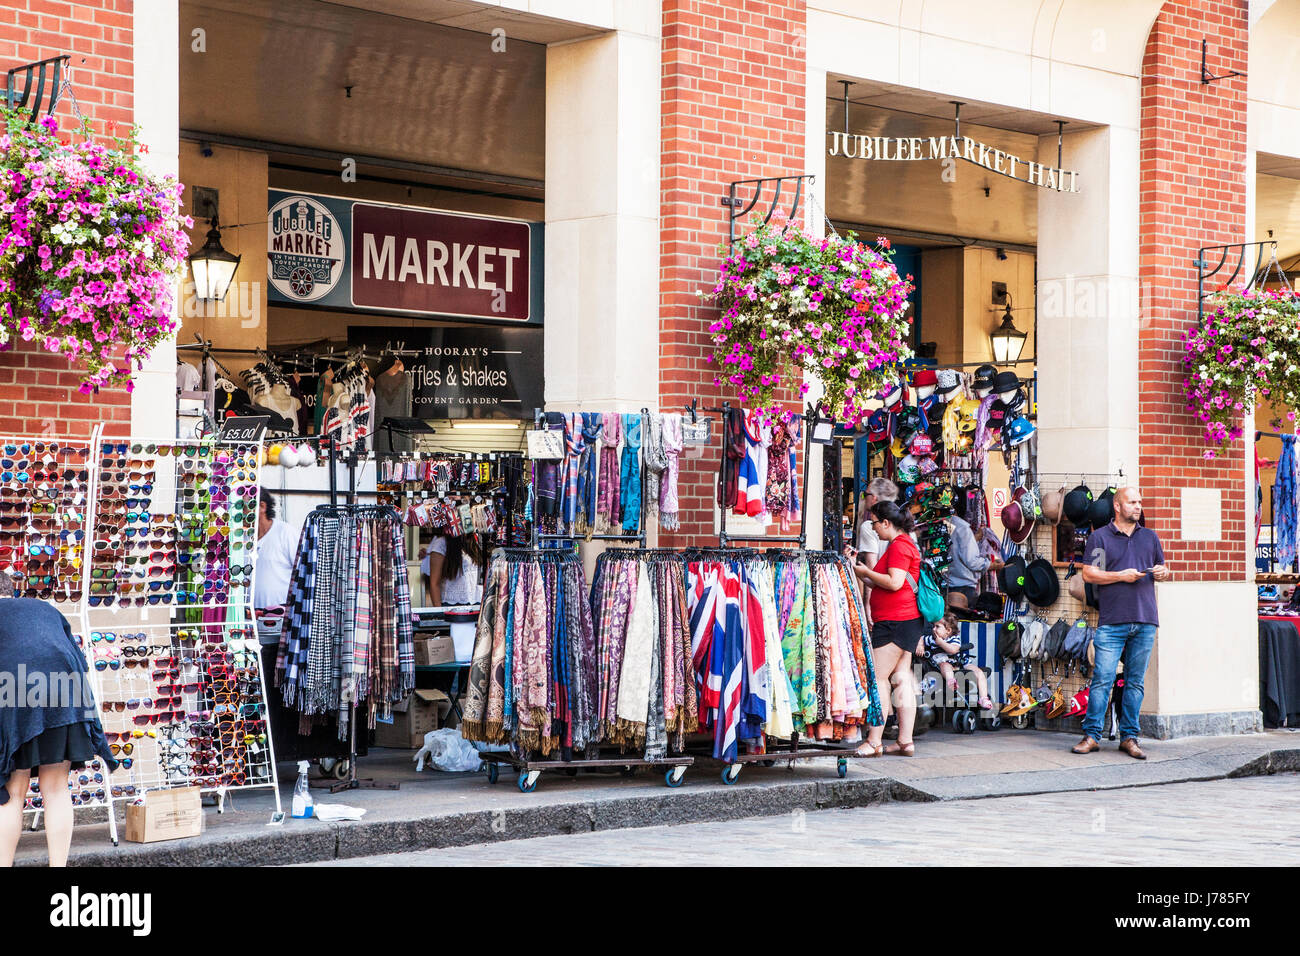 The Jubilee Market Hall in Covent Garden in London. Stock Photo